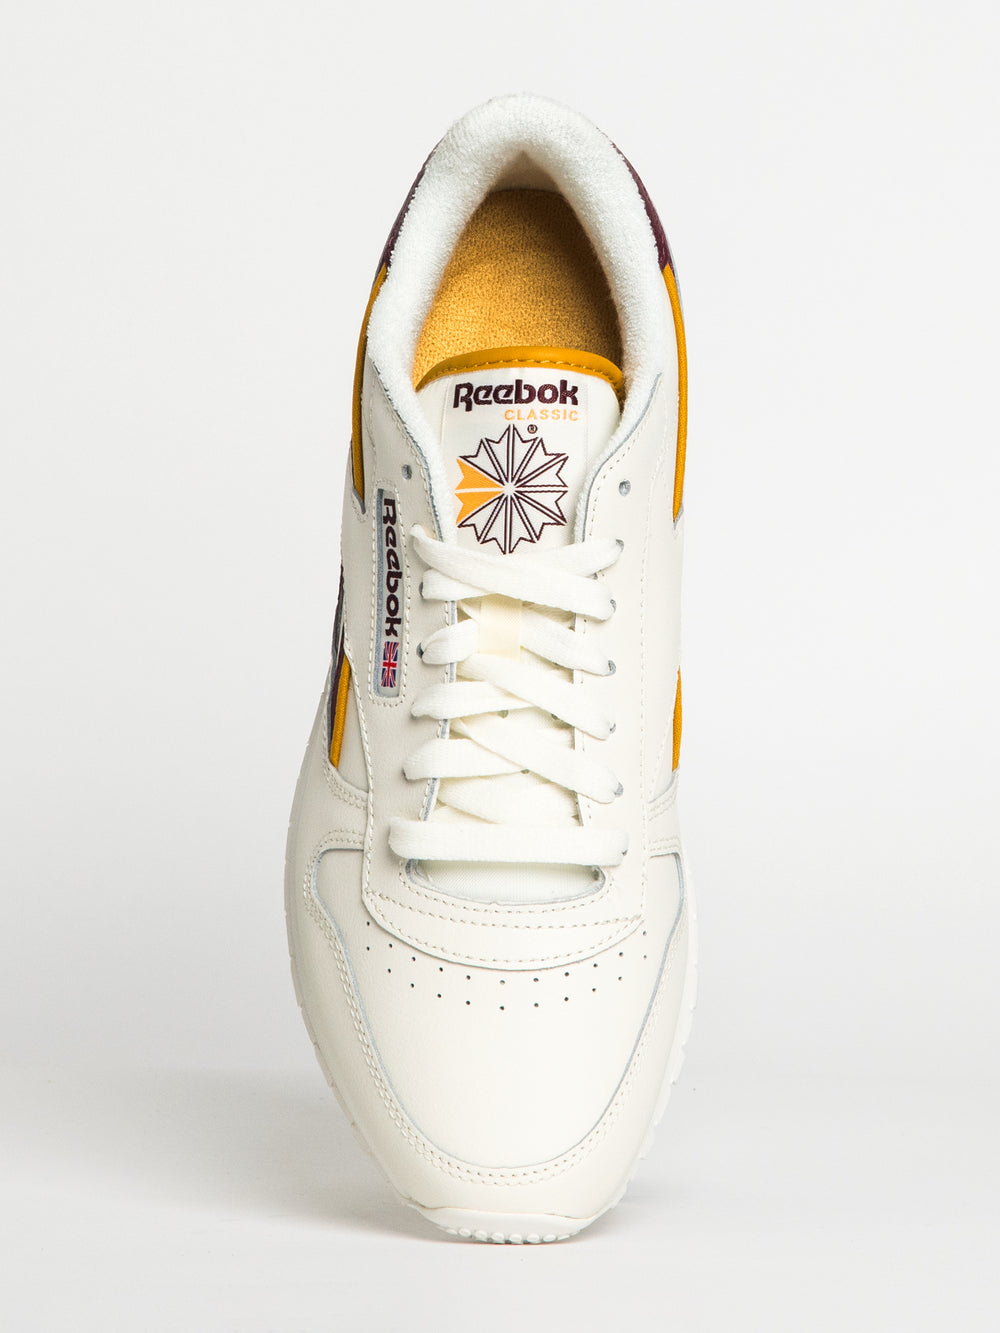 MENS REEBOK CLASSIC LEATHER SNEAKER | Boathouse Footwear Collective